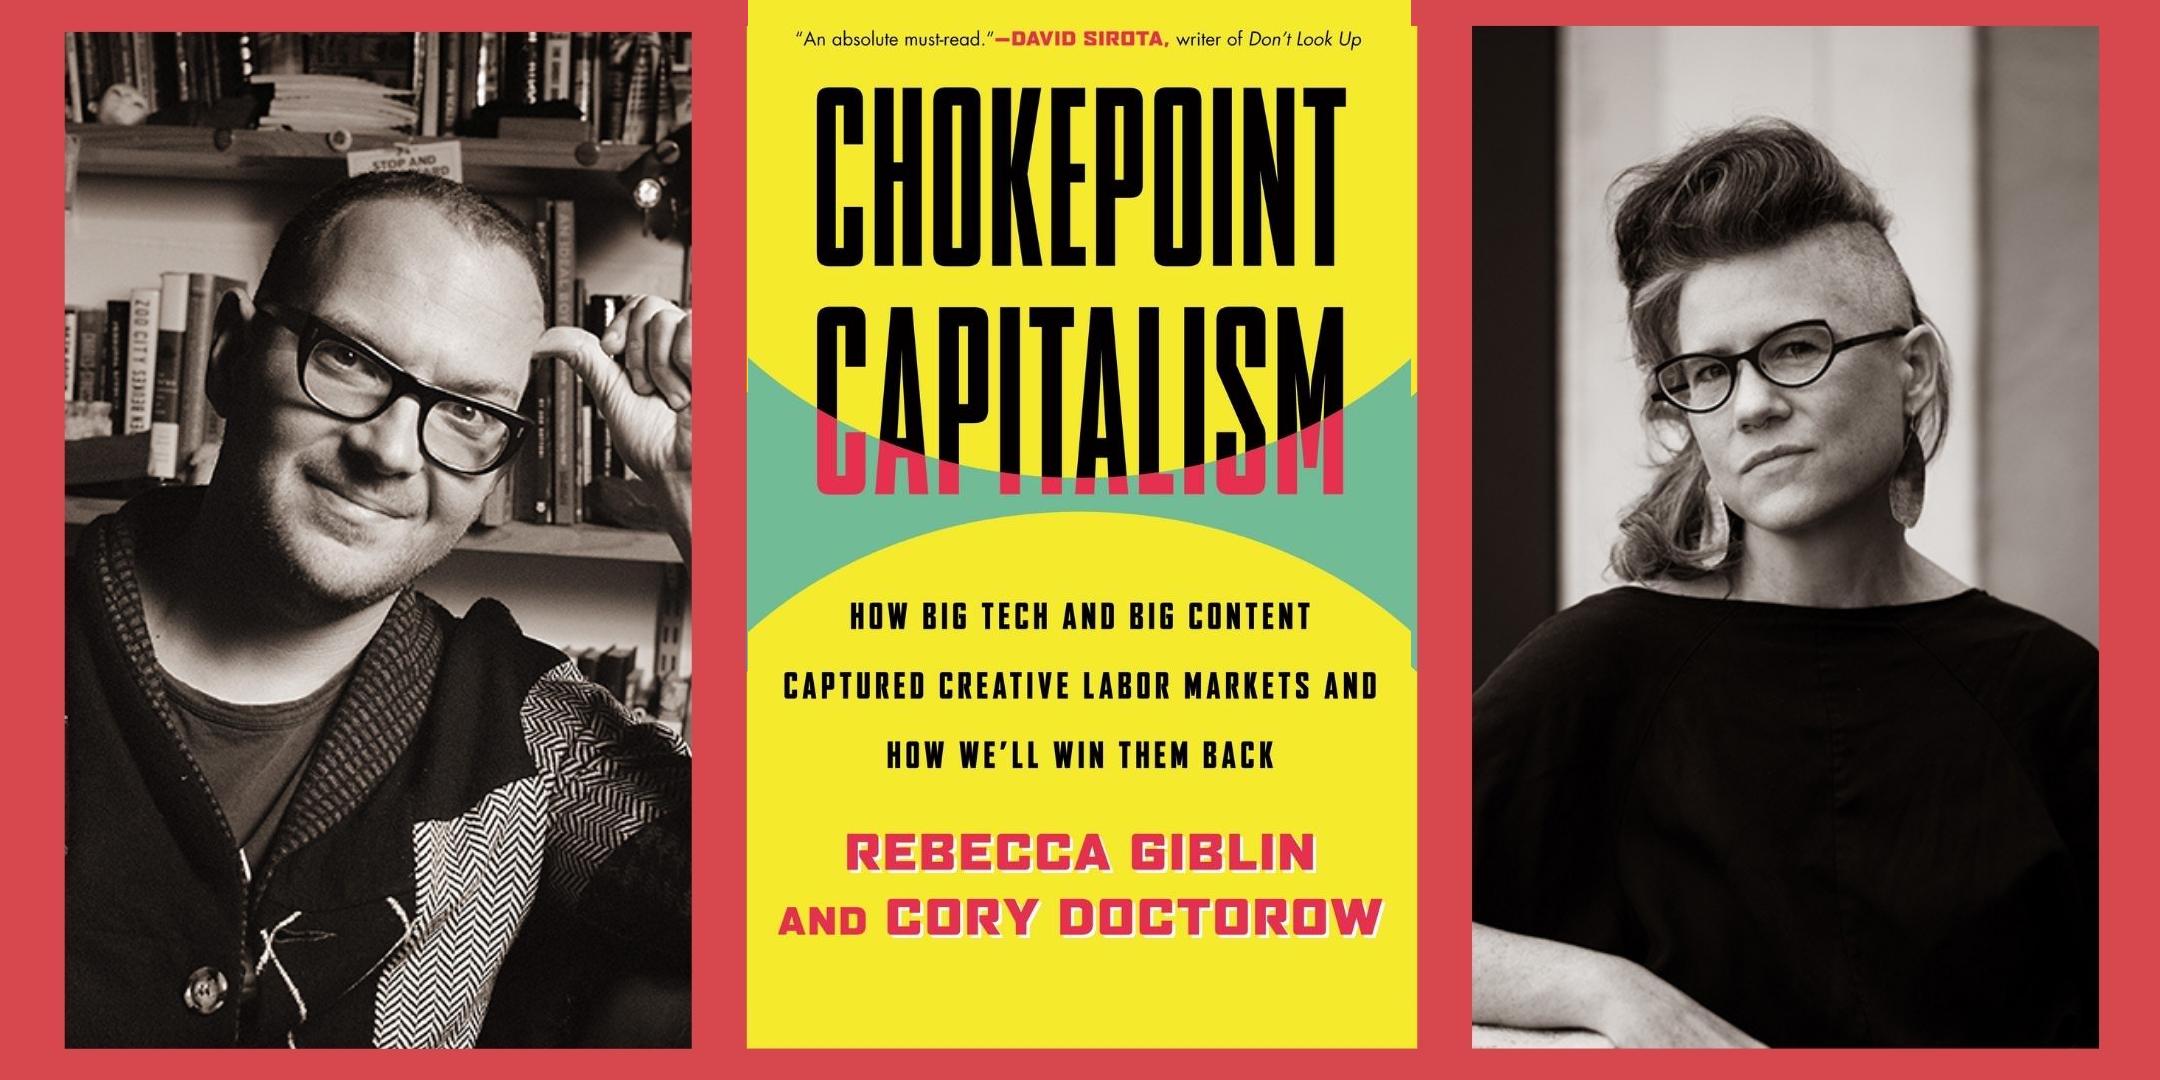 Event image for Chokepoint Capitalism FUNTIME BOOK PARTY event